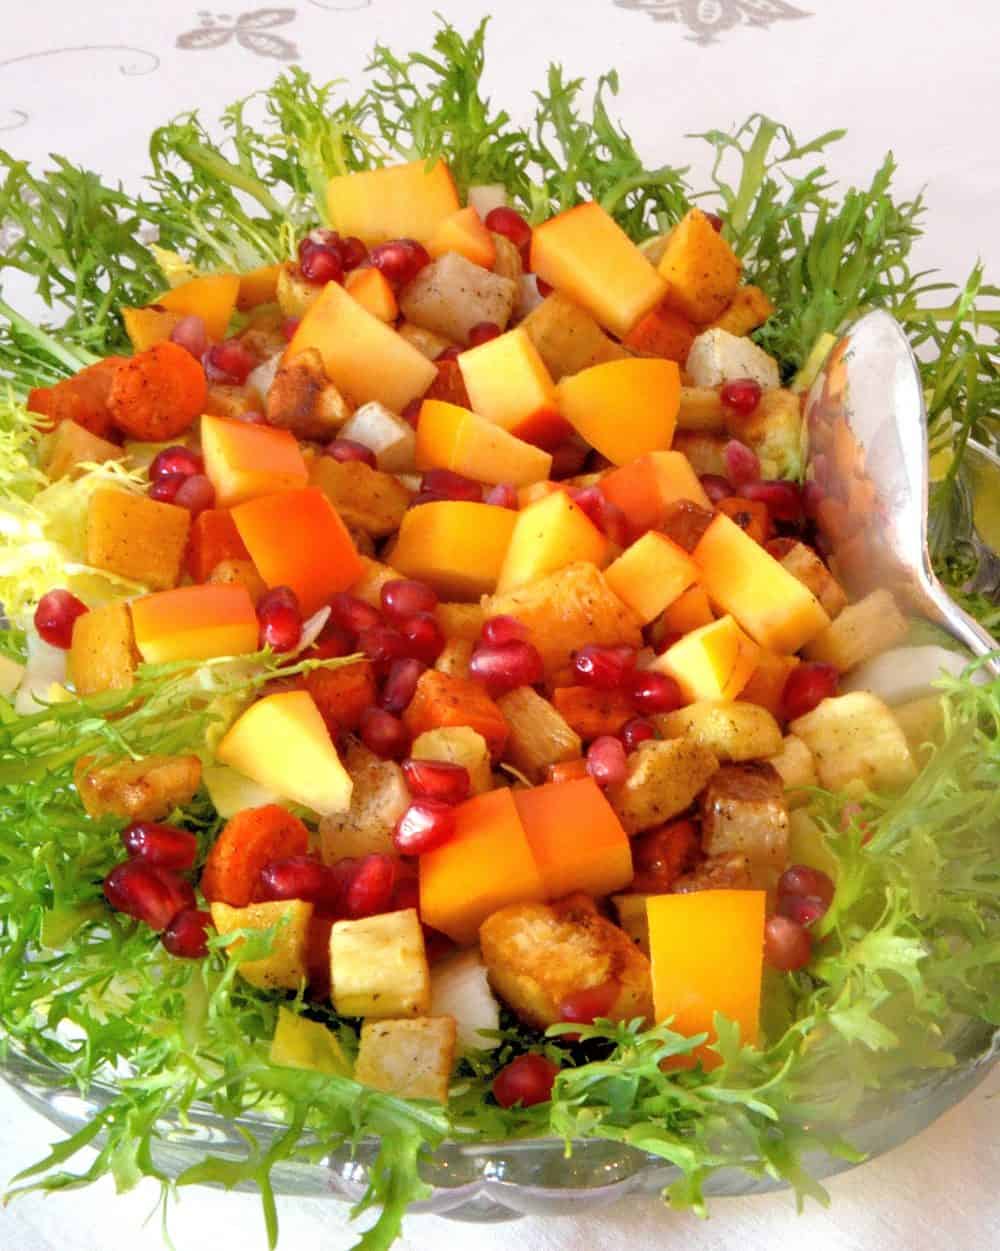 Persimmons and pomegranate seeds on frisee lettuce